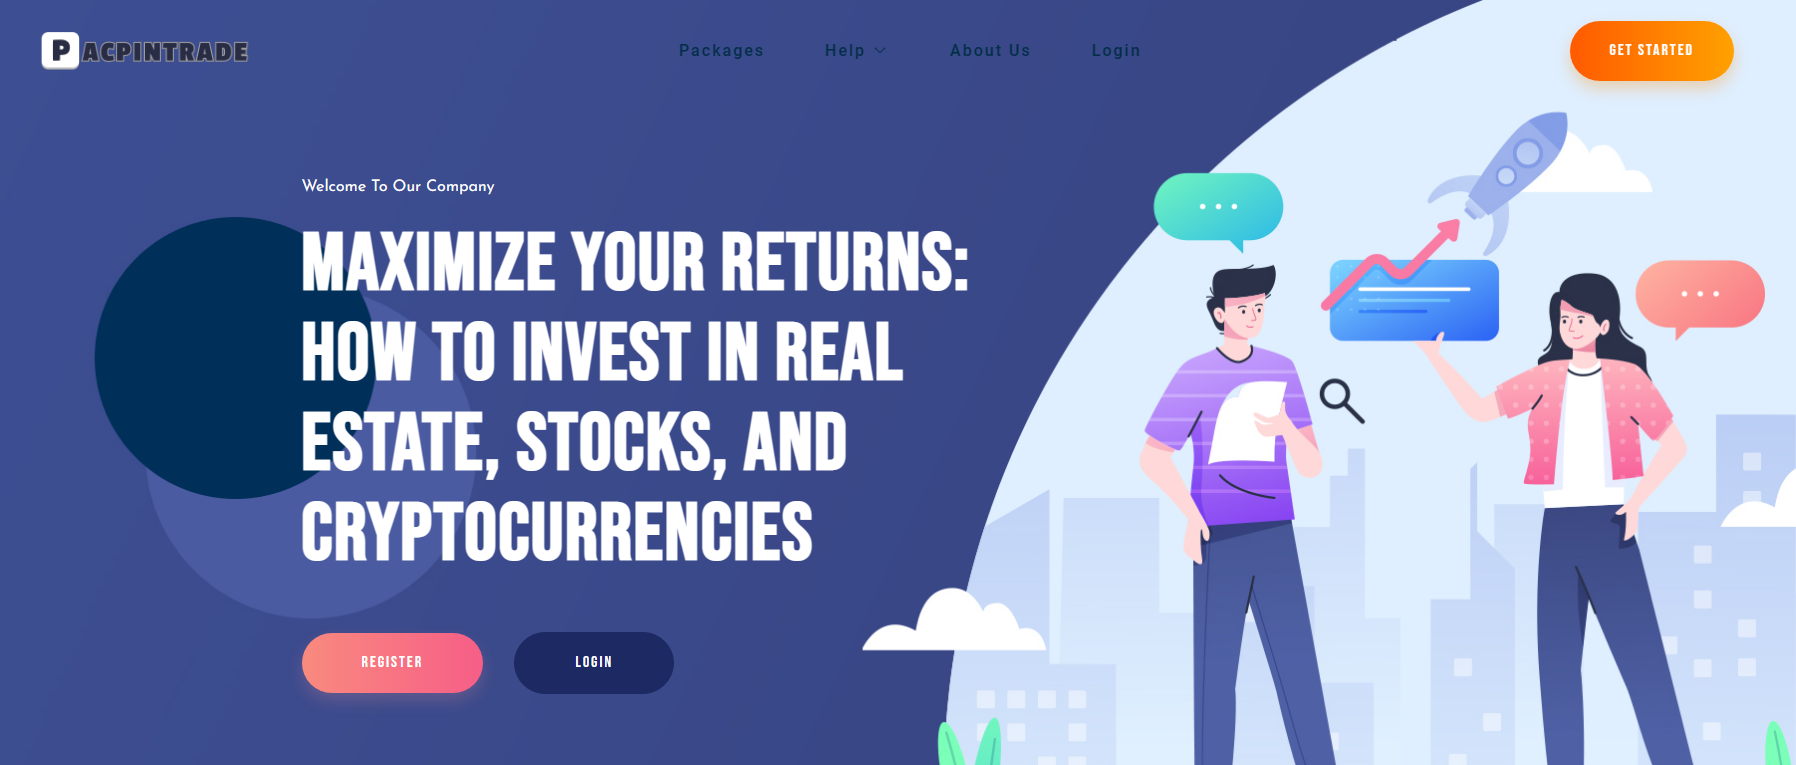 Homepage of Pacpintrade